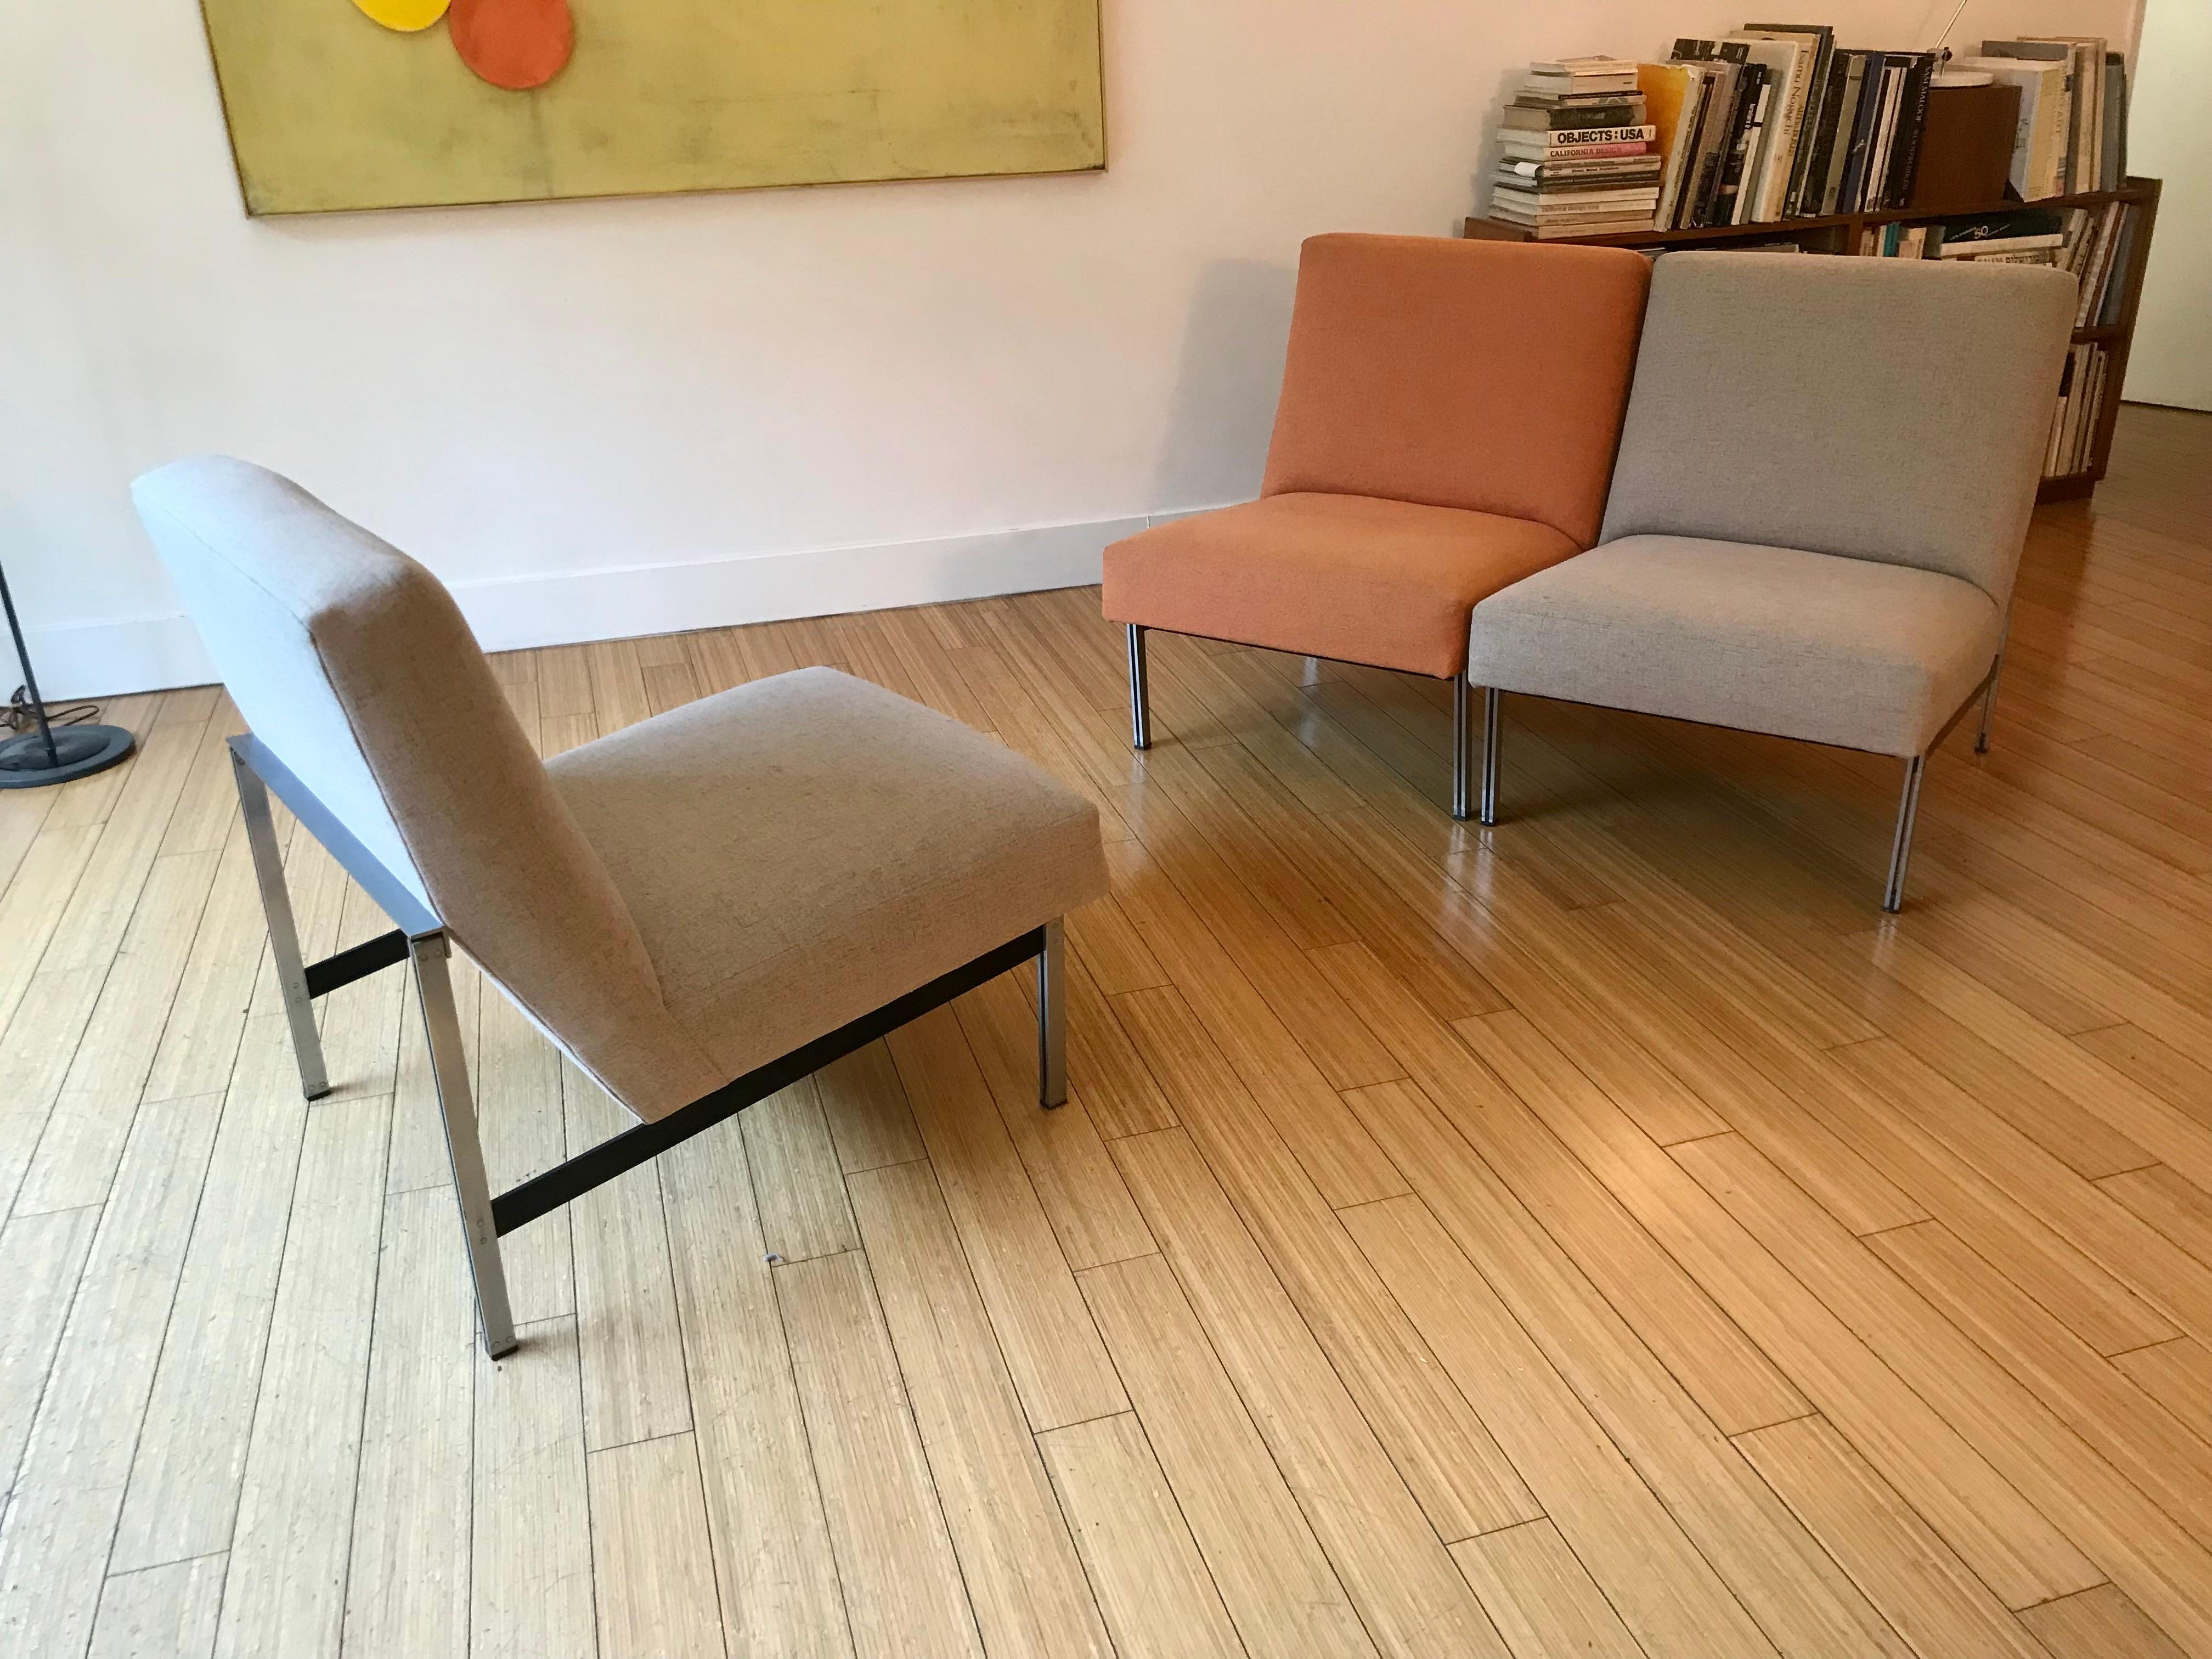 Classic Knoll Design.
Ultra modern.
Architectural base.
Fairly new paired down upholstery (about two years old).
Firm and stout padding, very comfy.
Bases are in original vintage condition with minor wear on close inspection, some scuffs / scratches